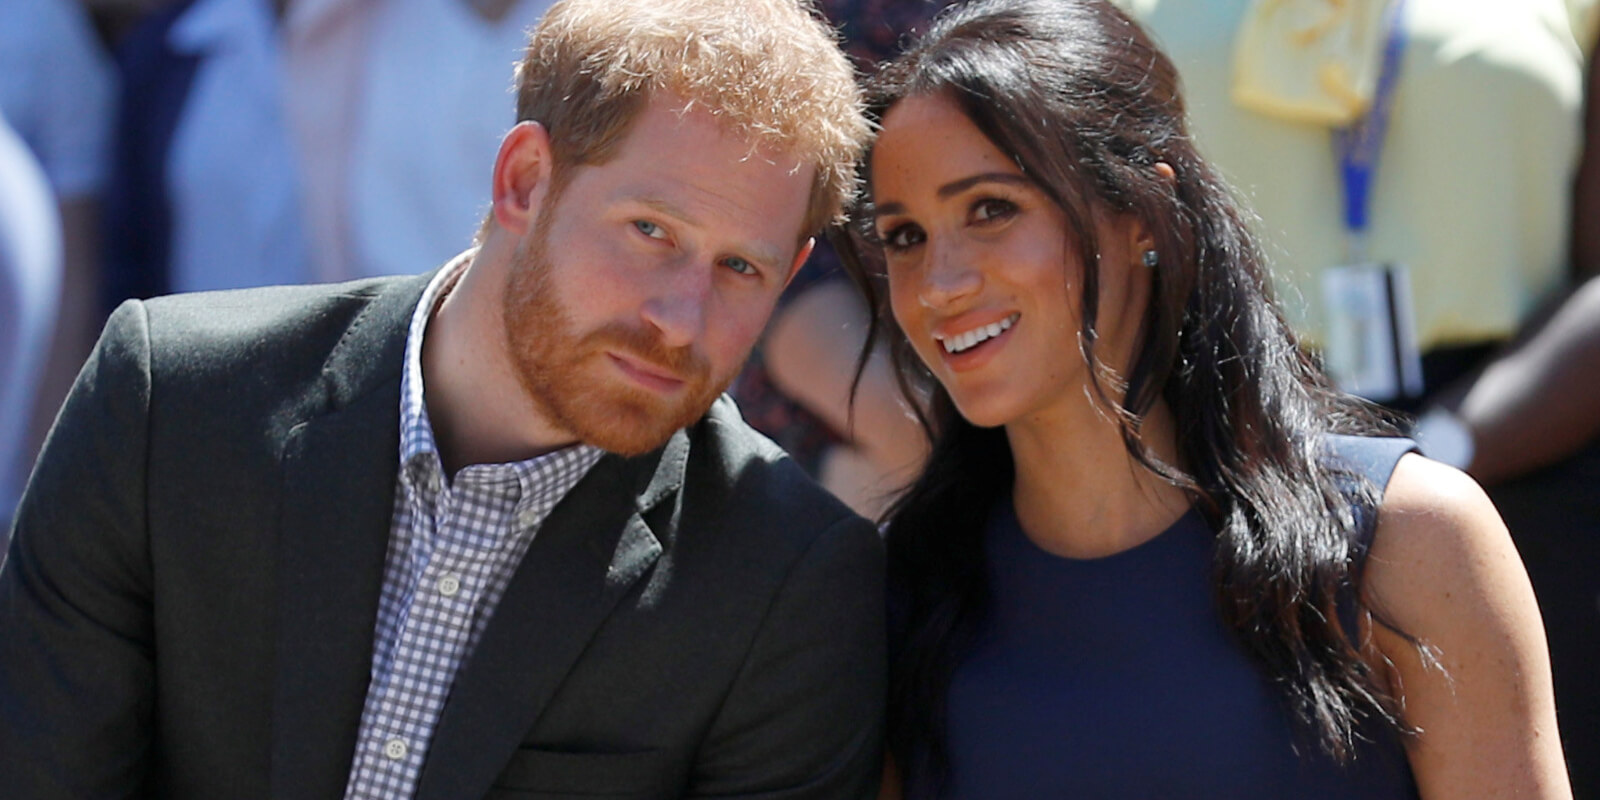 Meghan Markle and Prince Harry photographed in 2018.